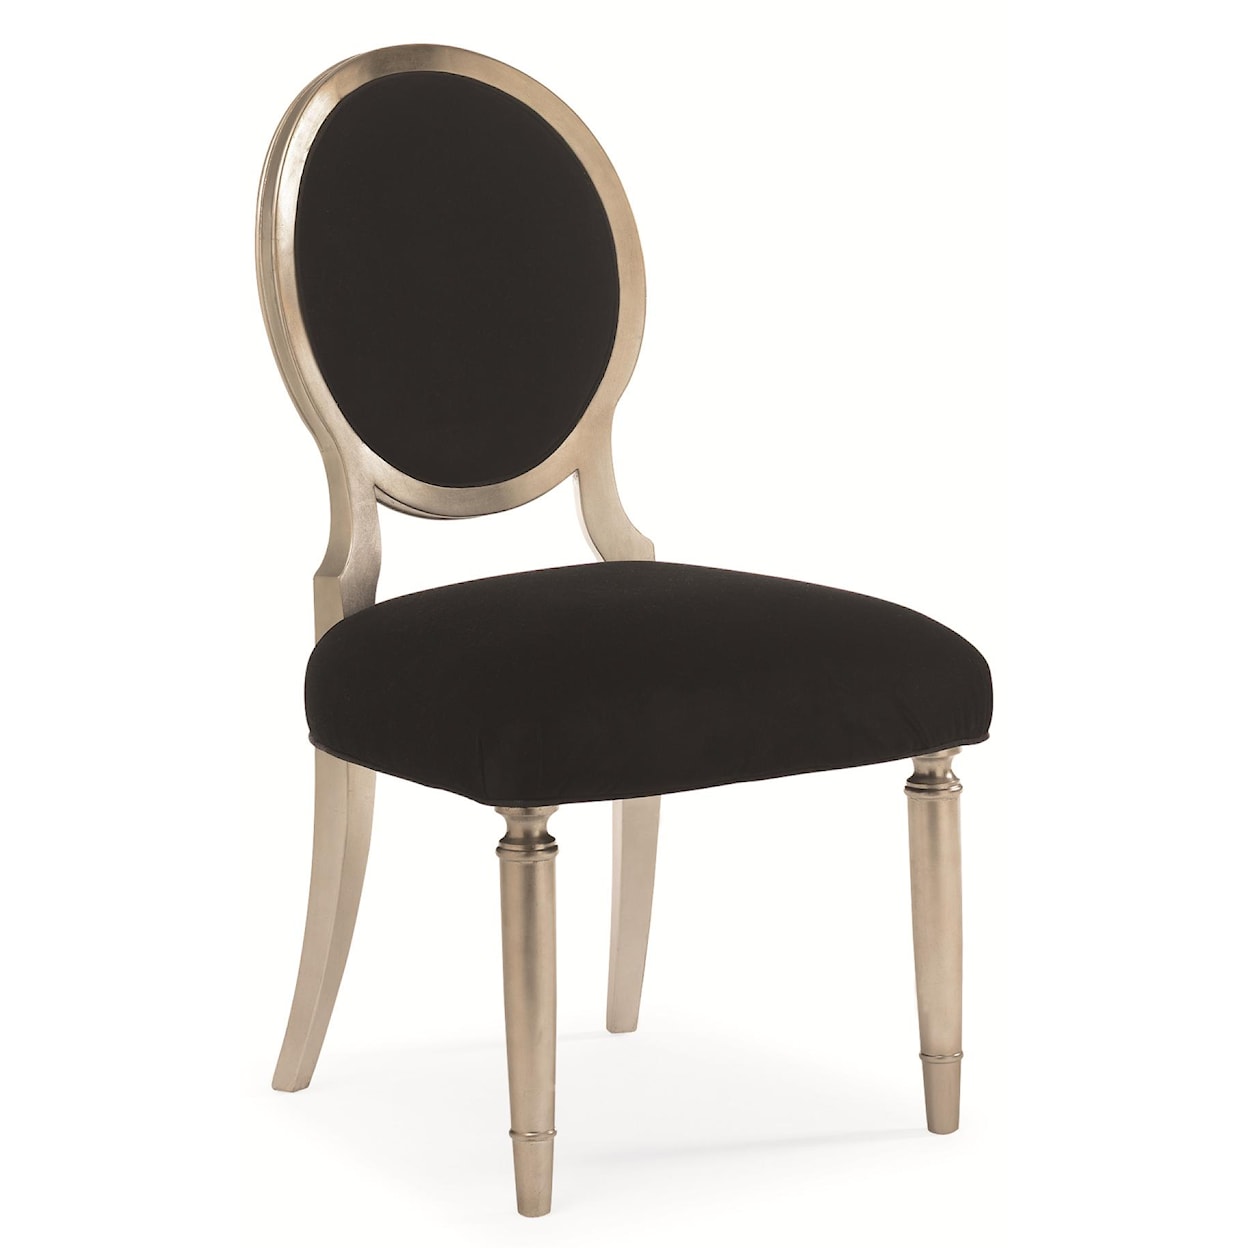 Caracole New Traditional "Chit Chat" Dining Side Chair